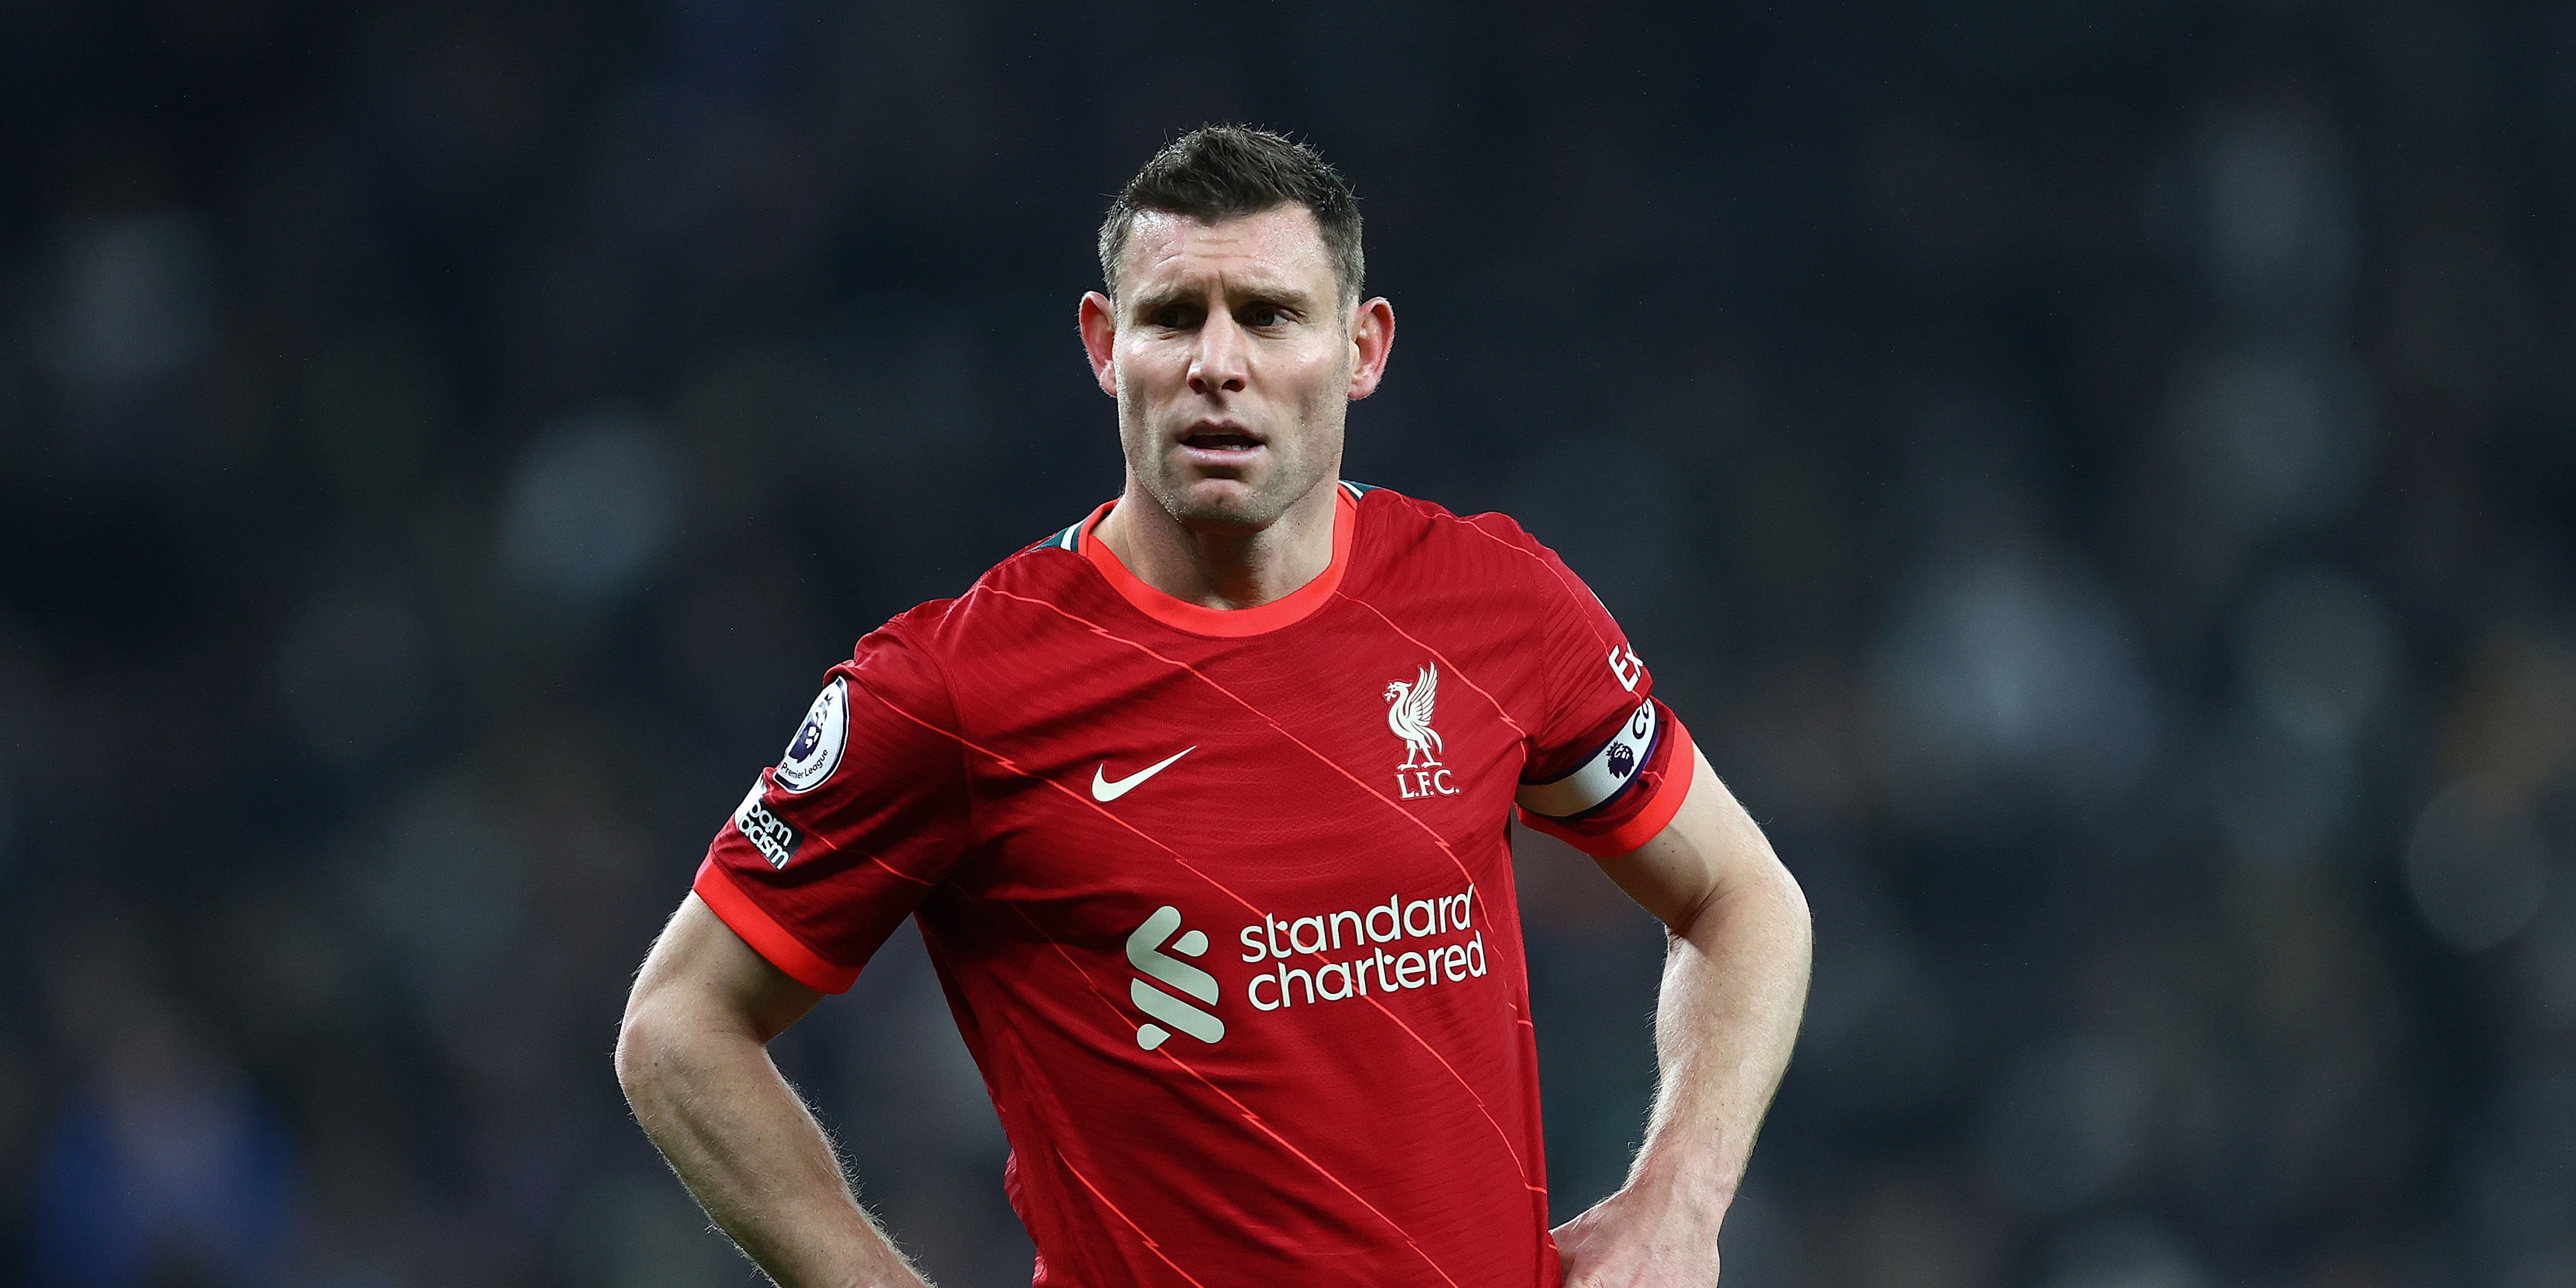 Length of contract Liverpool are prepping for James Milner reported by Fichajes journalist